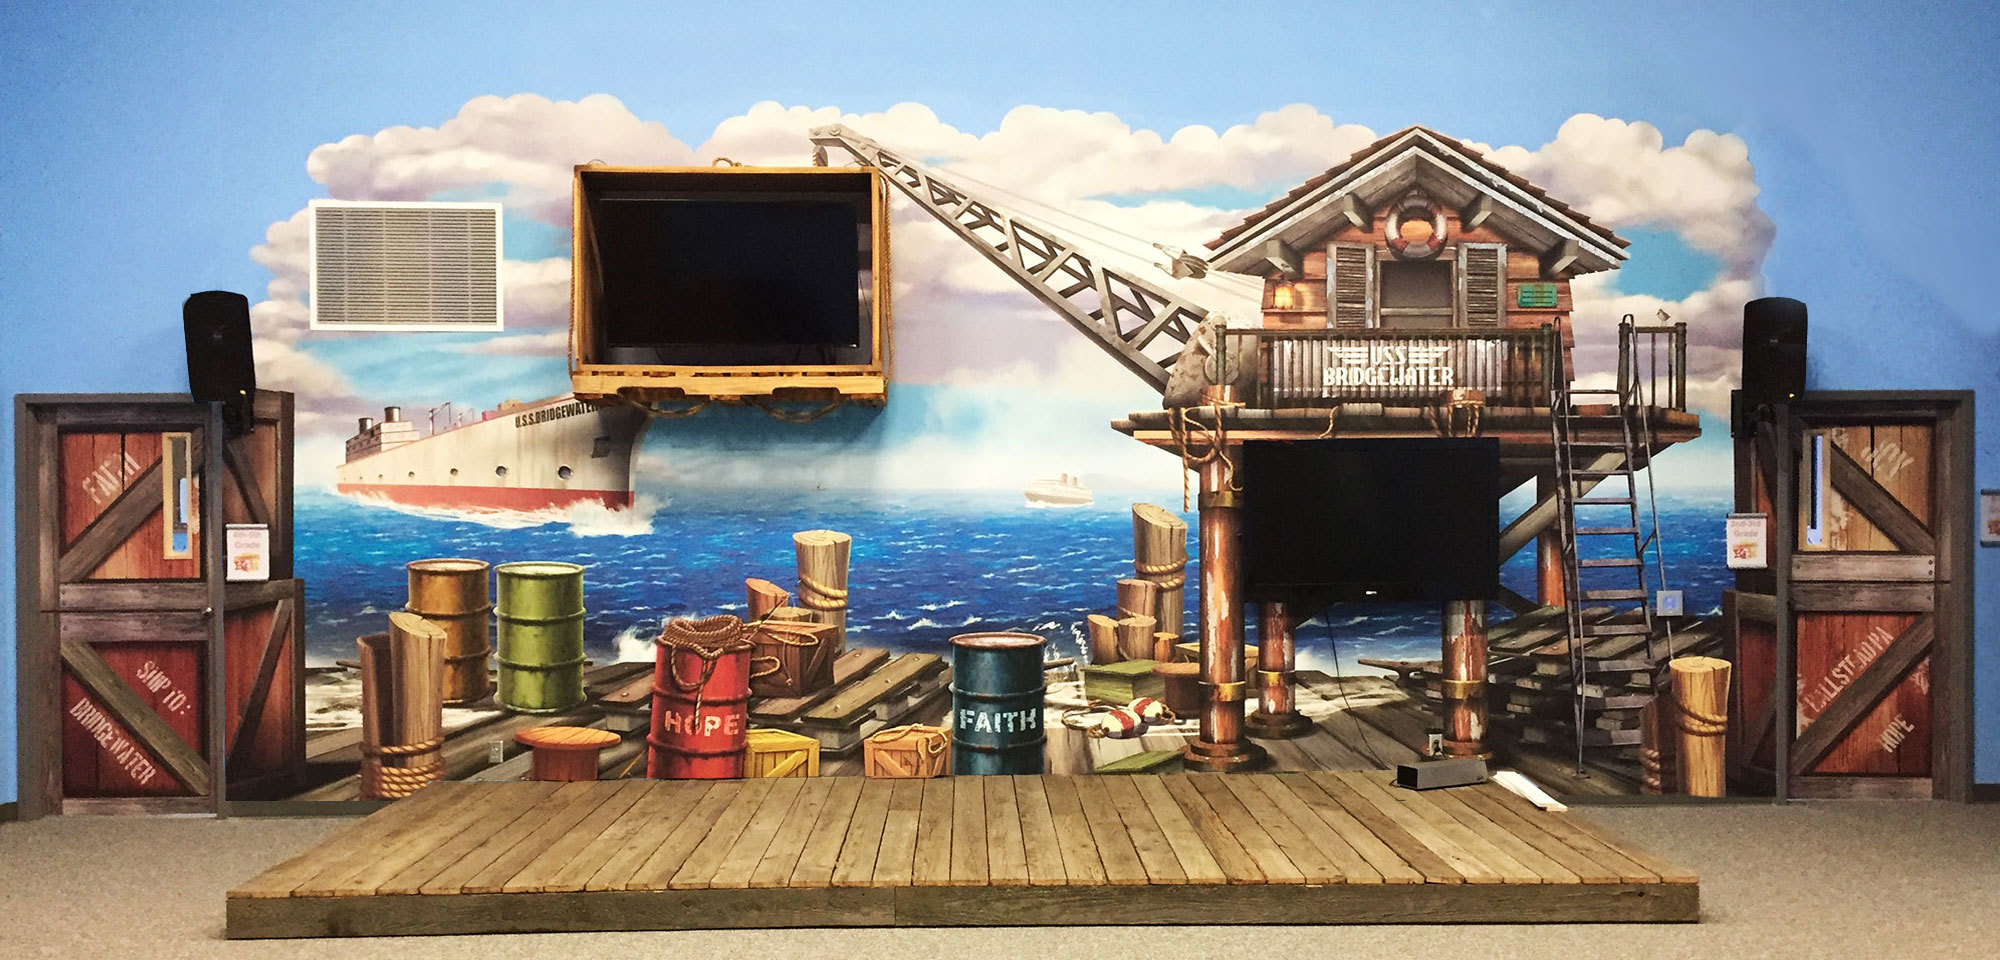 Shipping Dock Themed wall mural with crates, barrels and crane shed holding a wooden 3D TV surround on a wooden stage